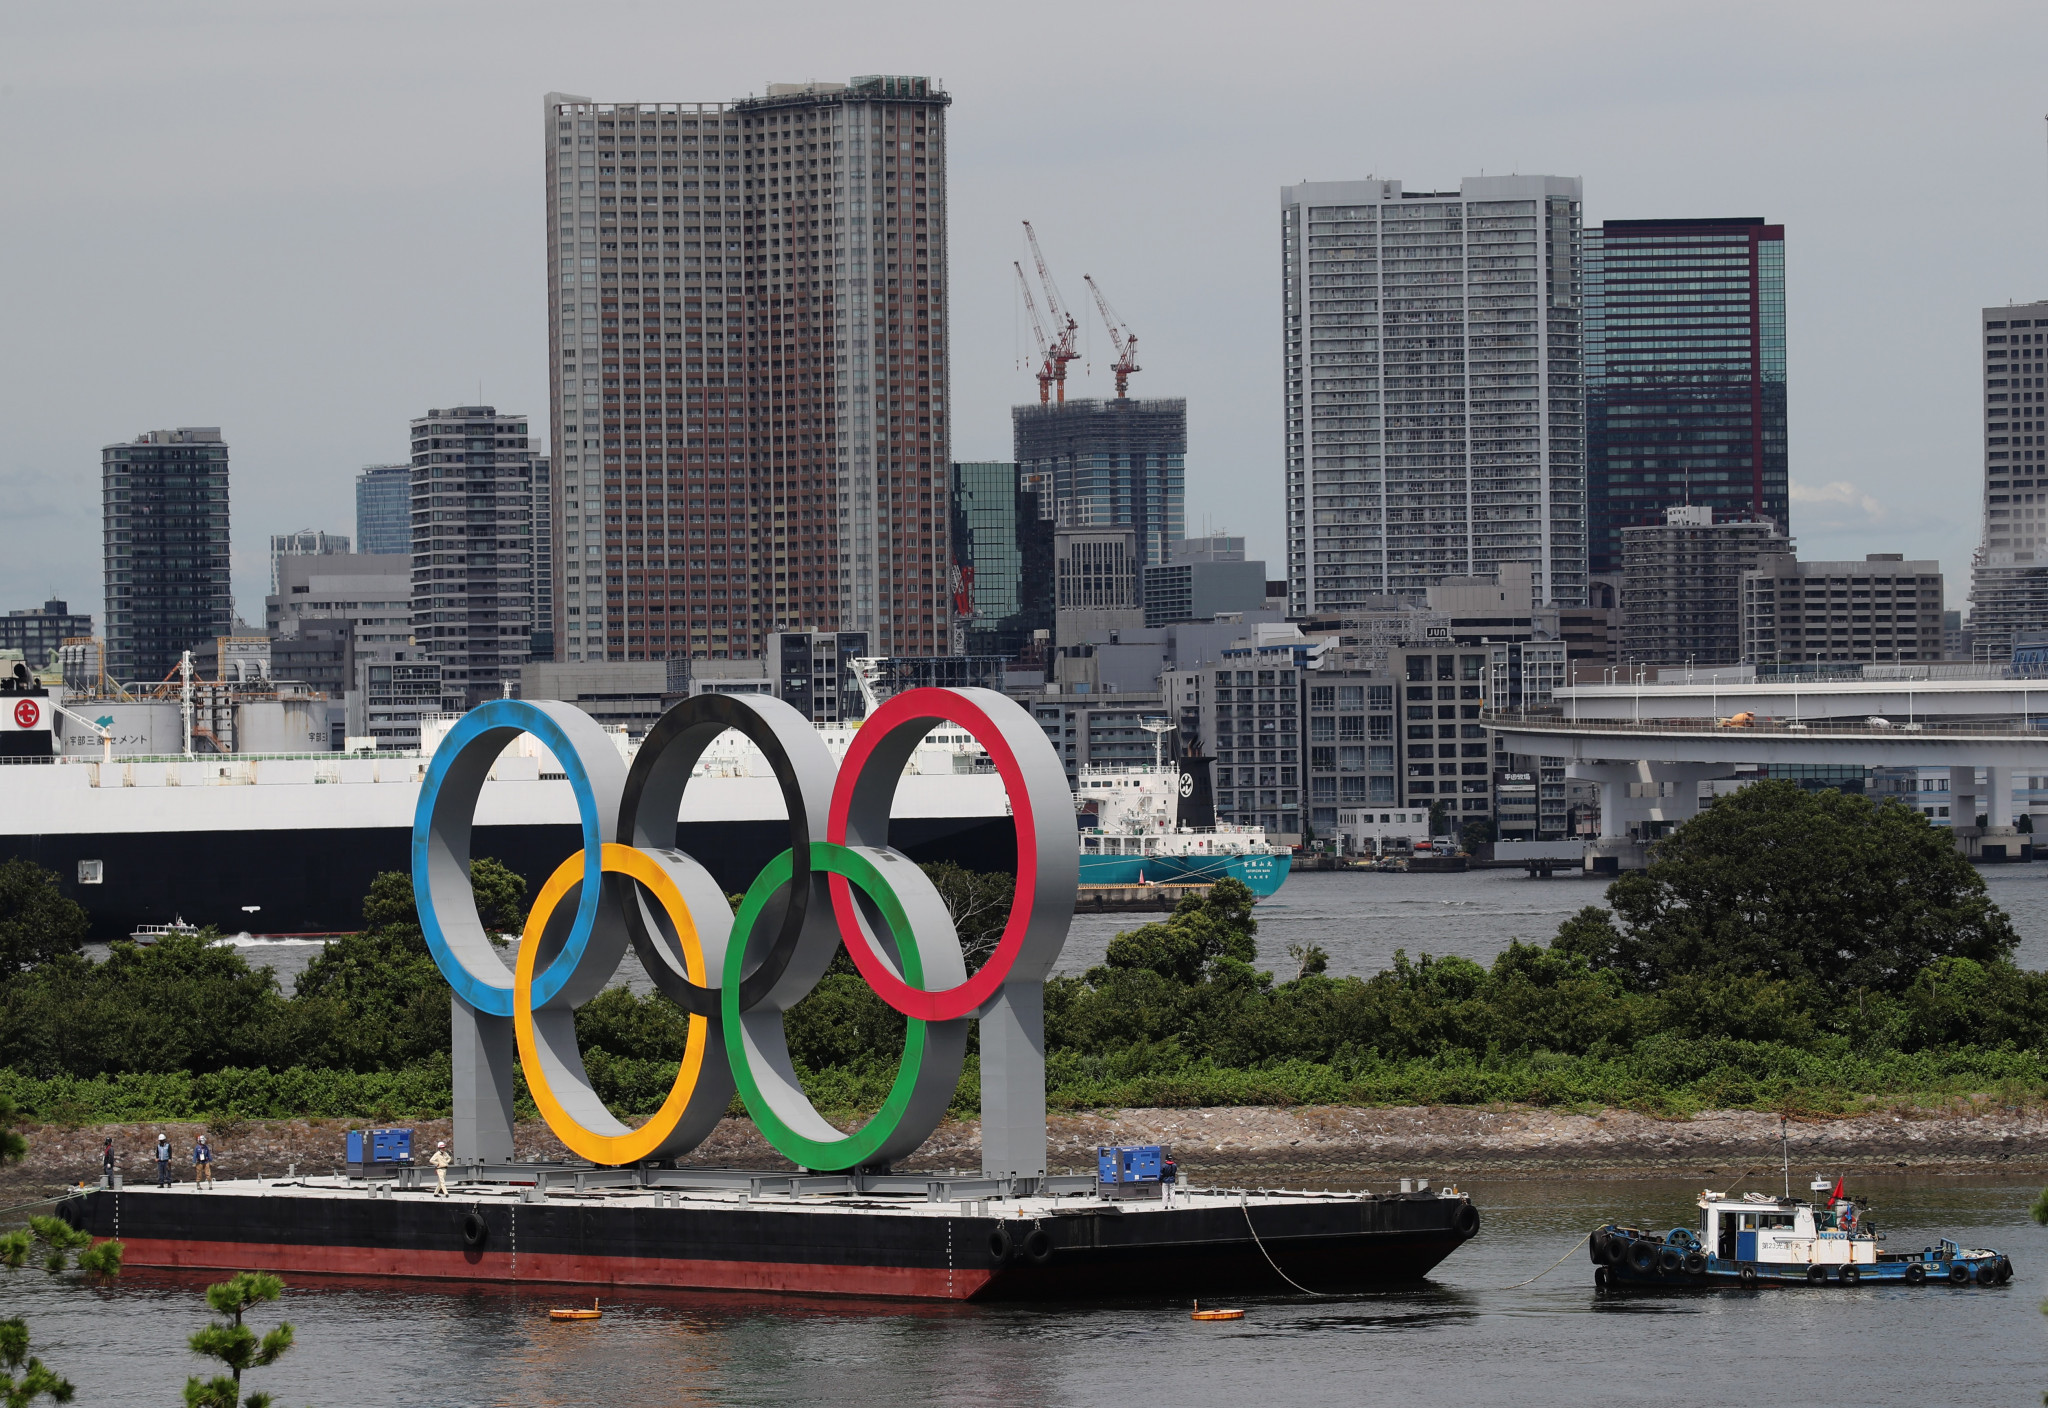 The Olympic Rings have been removed to make way for the Paralympic symbol  ©Getty Images